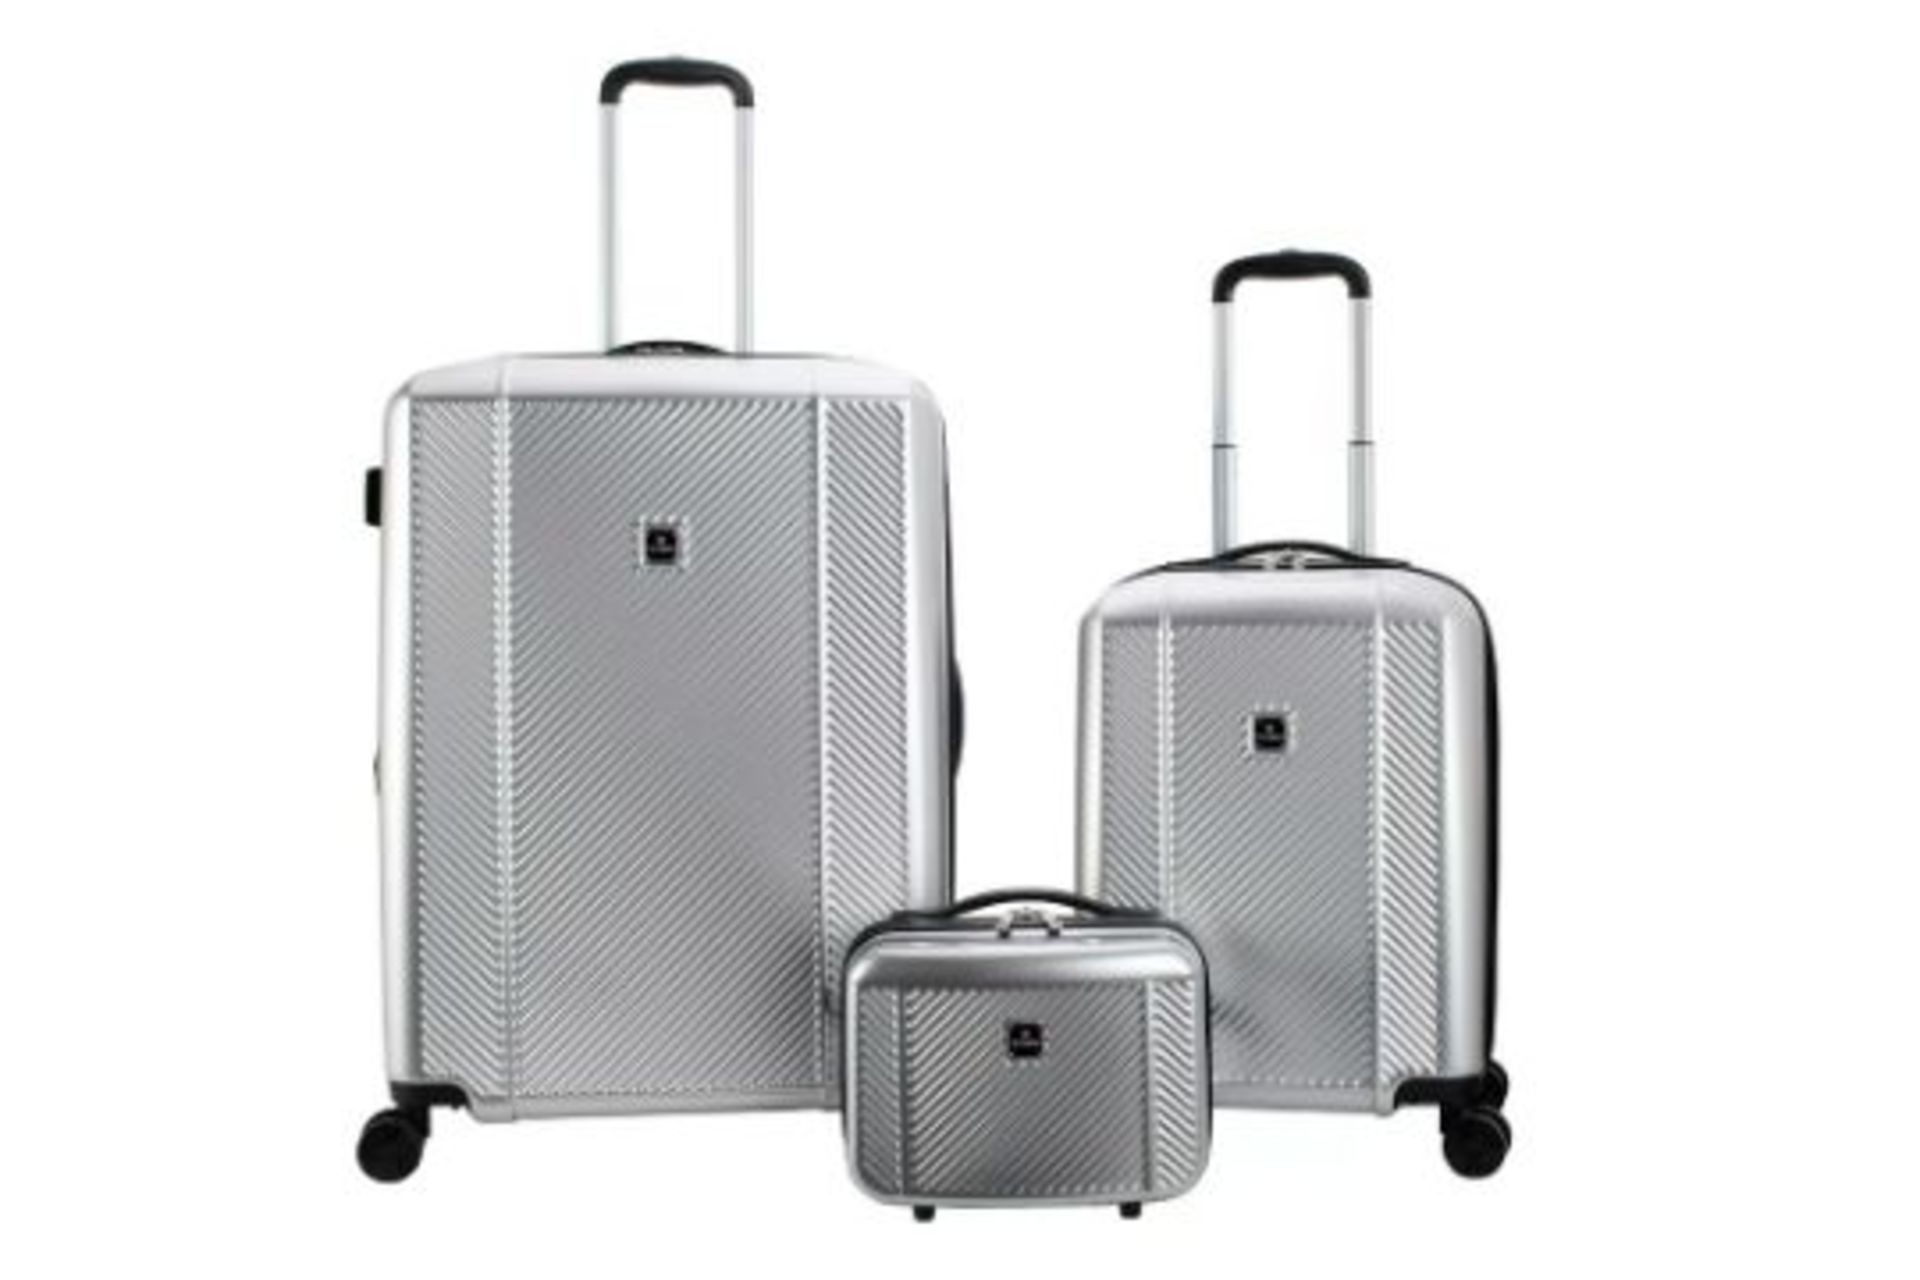 3 x New Boxed 3 Piece Sets of TAG Spectrum Hardside Luggage Set. (SILVER). RRP £199.99 per set. - Image 2 of 2